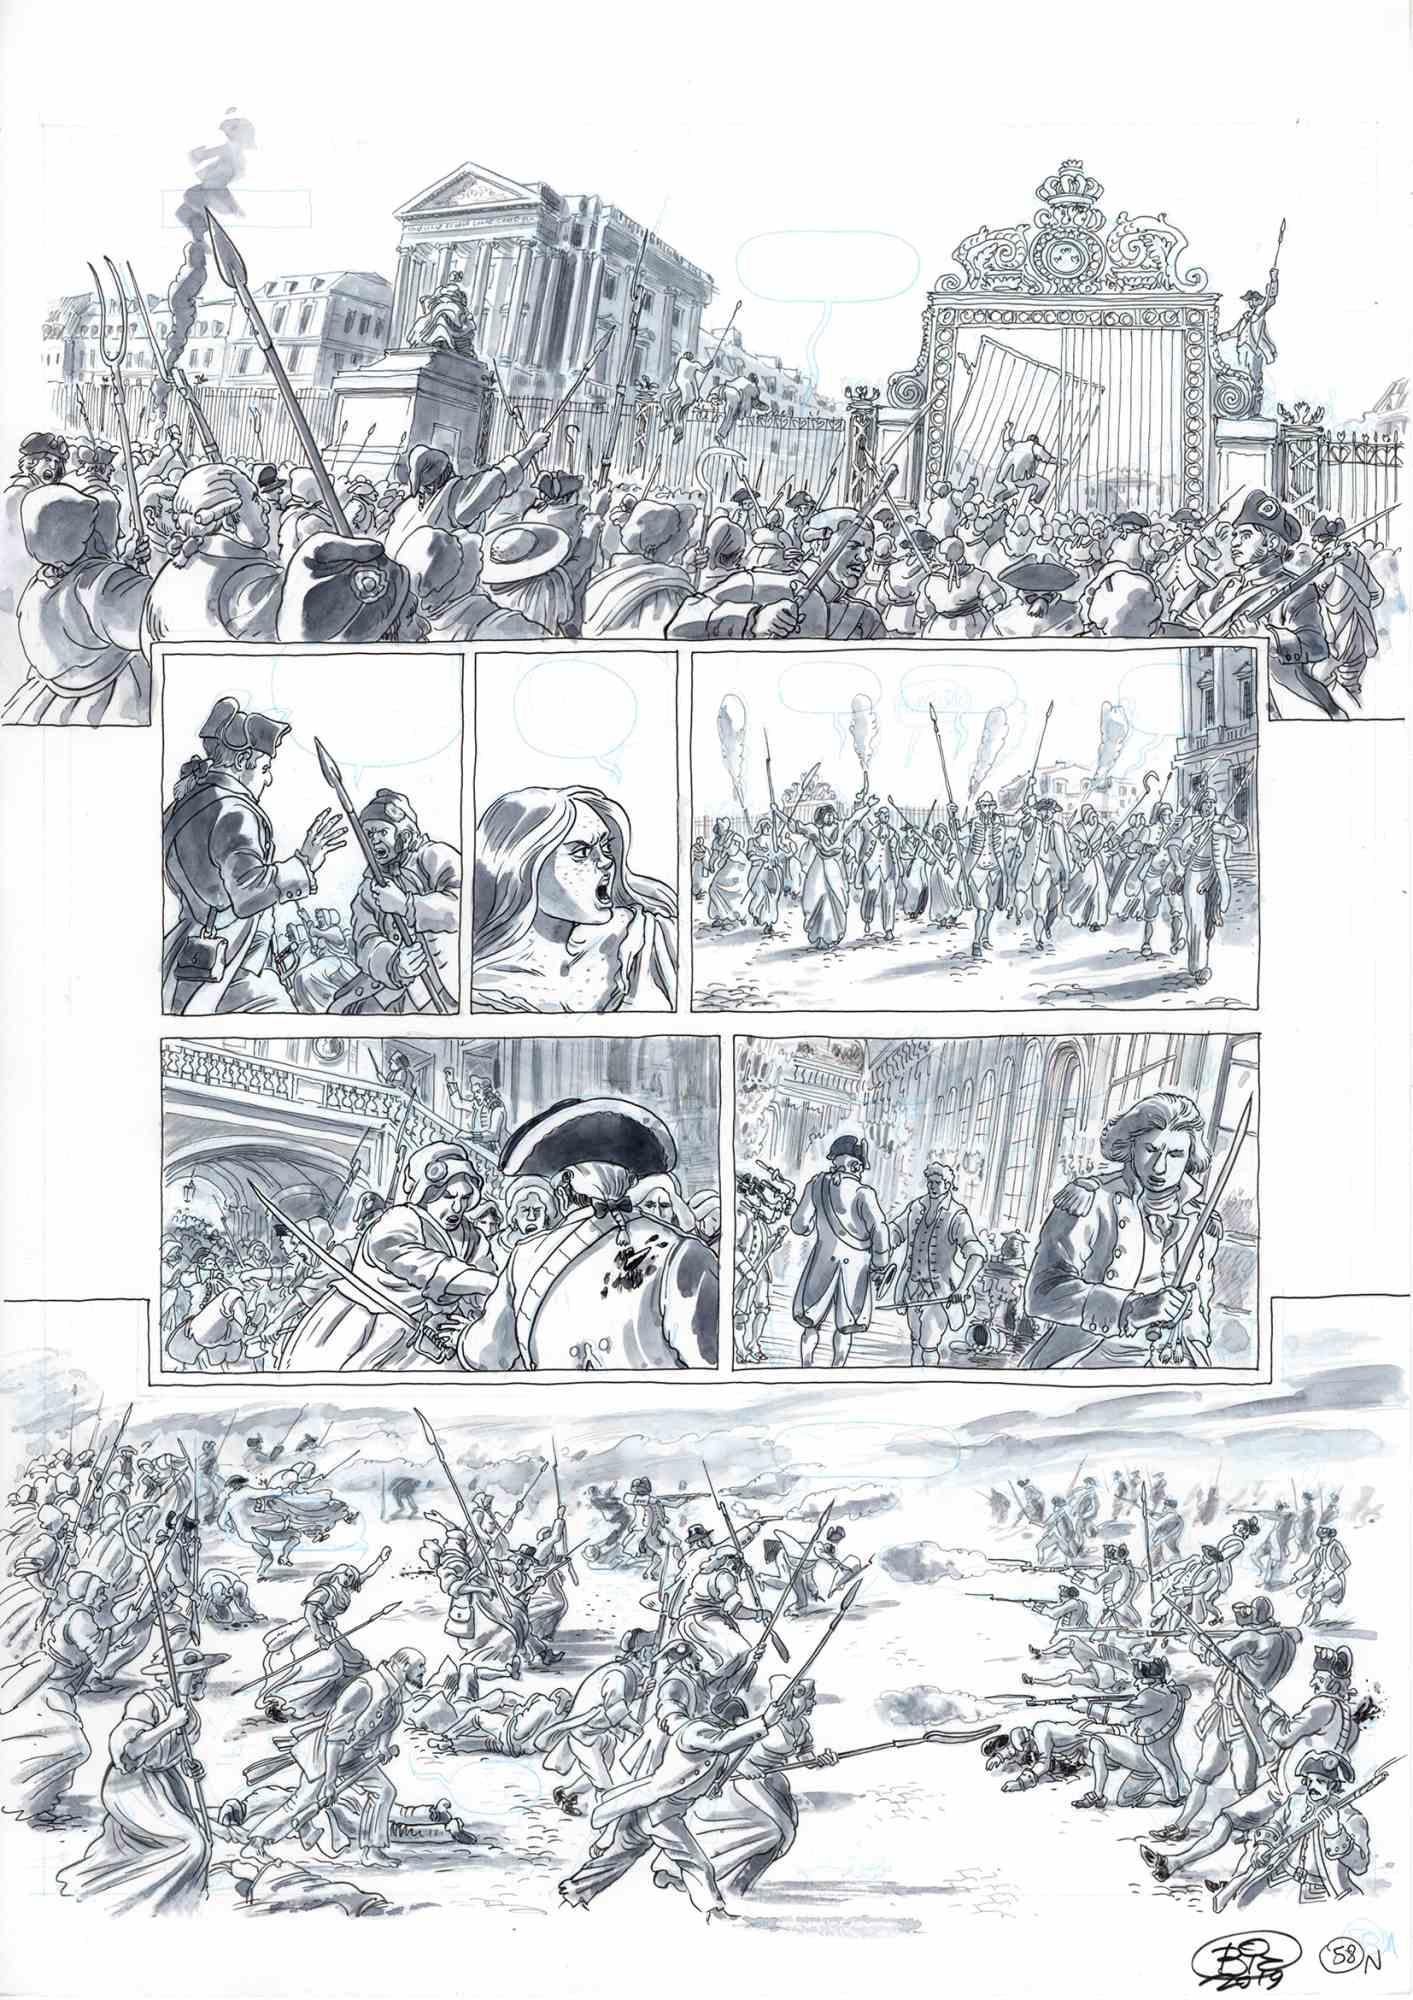 This work entitled "Conquest of Versailles" is a comic board belonging to the graphic novel published by Glènat Edition in 2019 "1789 - La naissance d'un monde". The work was made by Vincenzo Bizzarri between 2018 and 2019, total work duration of